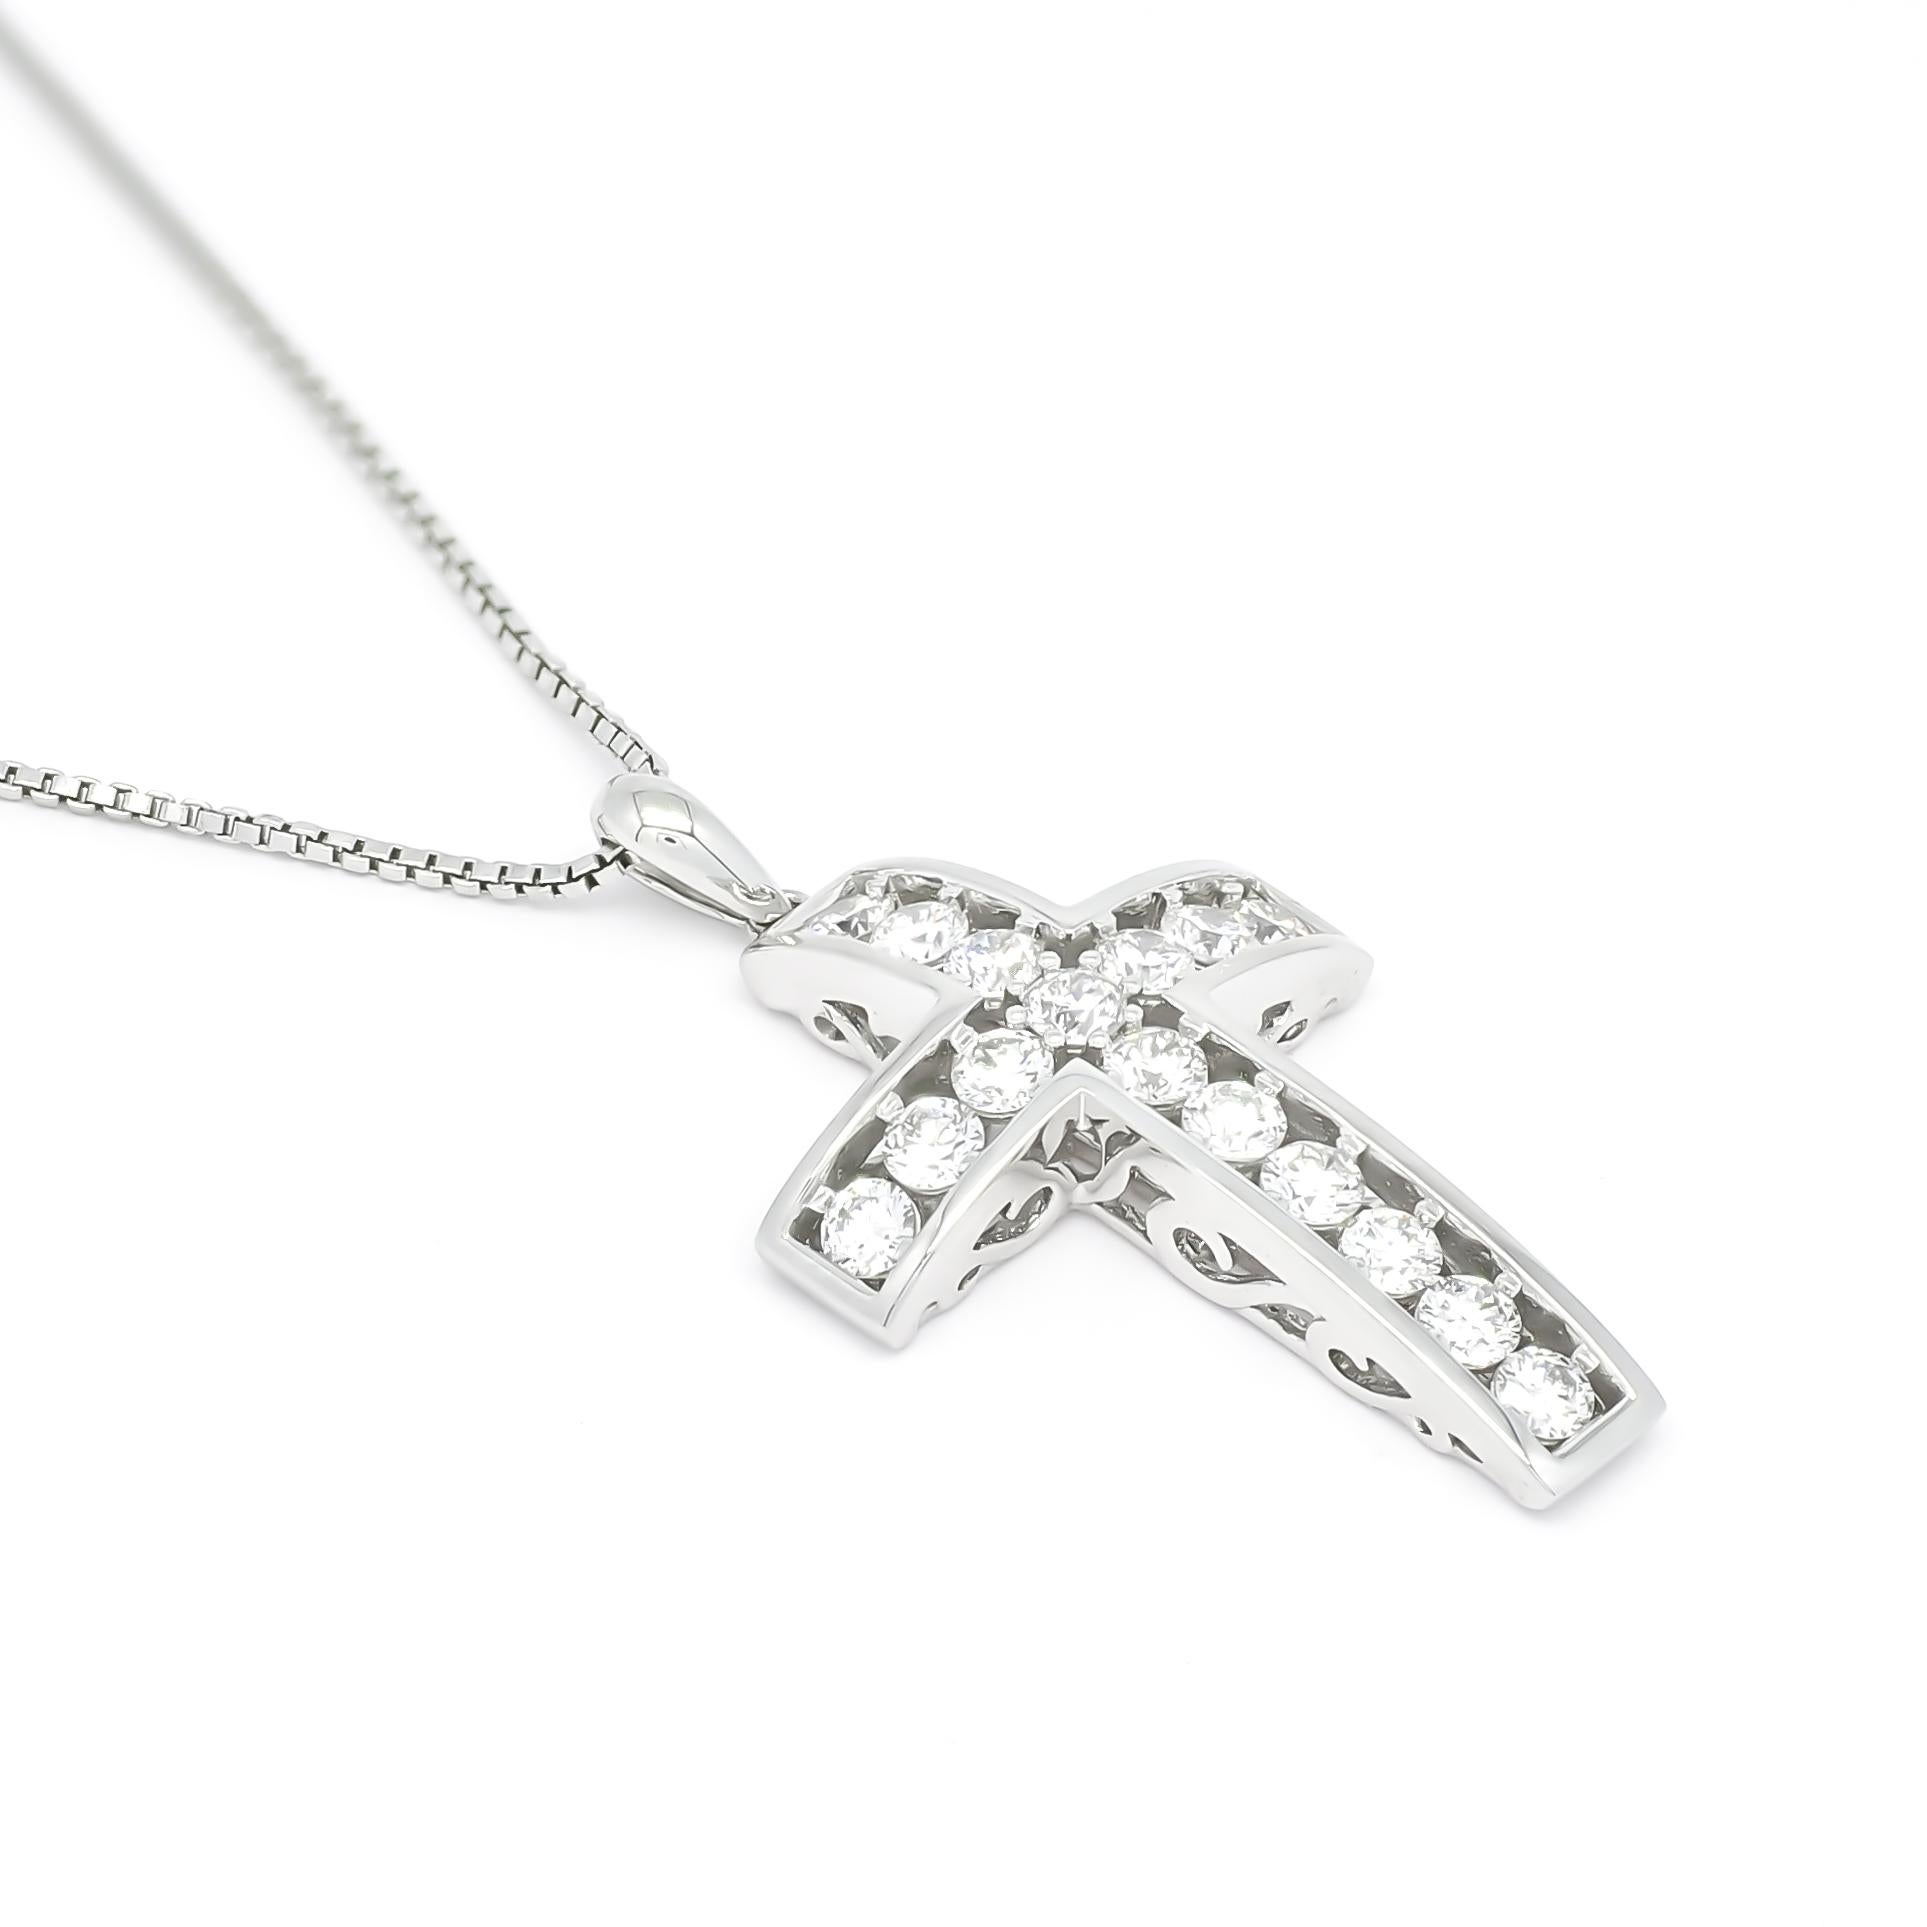 We are delighted to introduce to you the exquisite Natural Diamond Pendant, a stunning 18KT White Gold Vintage Cross Crucifix Pendant Necklace that embodies timeless elegance and profound symbolism.

Crafted with meticulous attention to detail, this